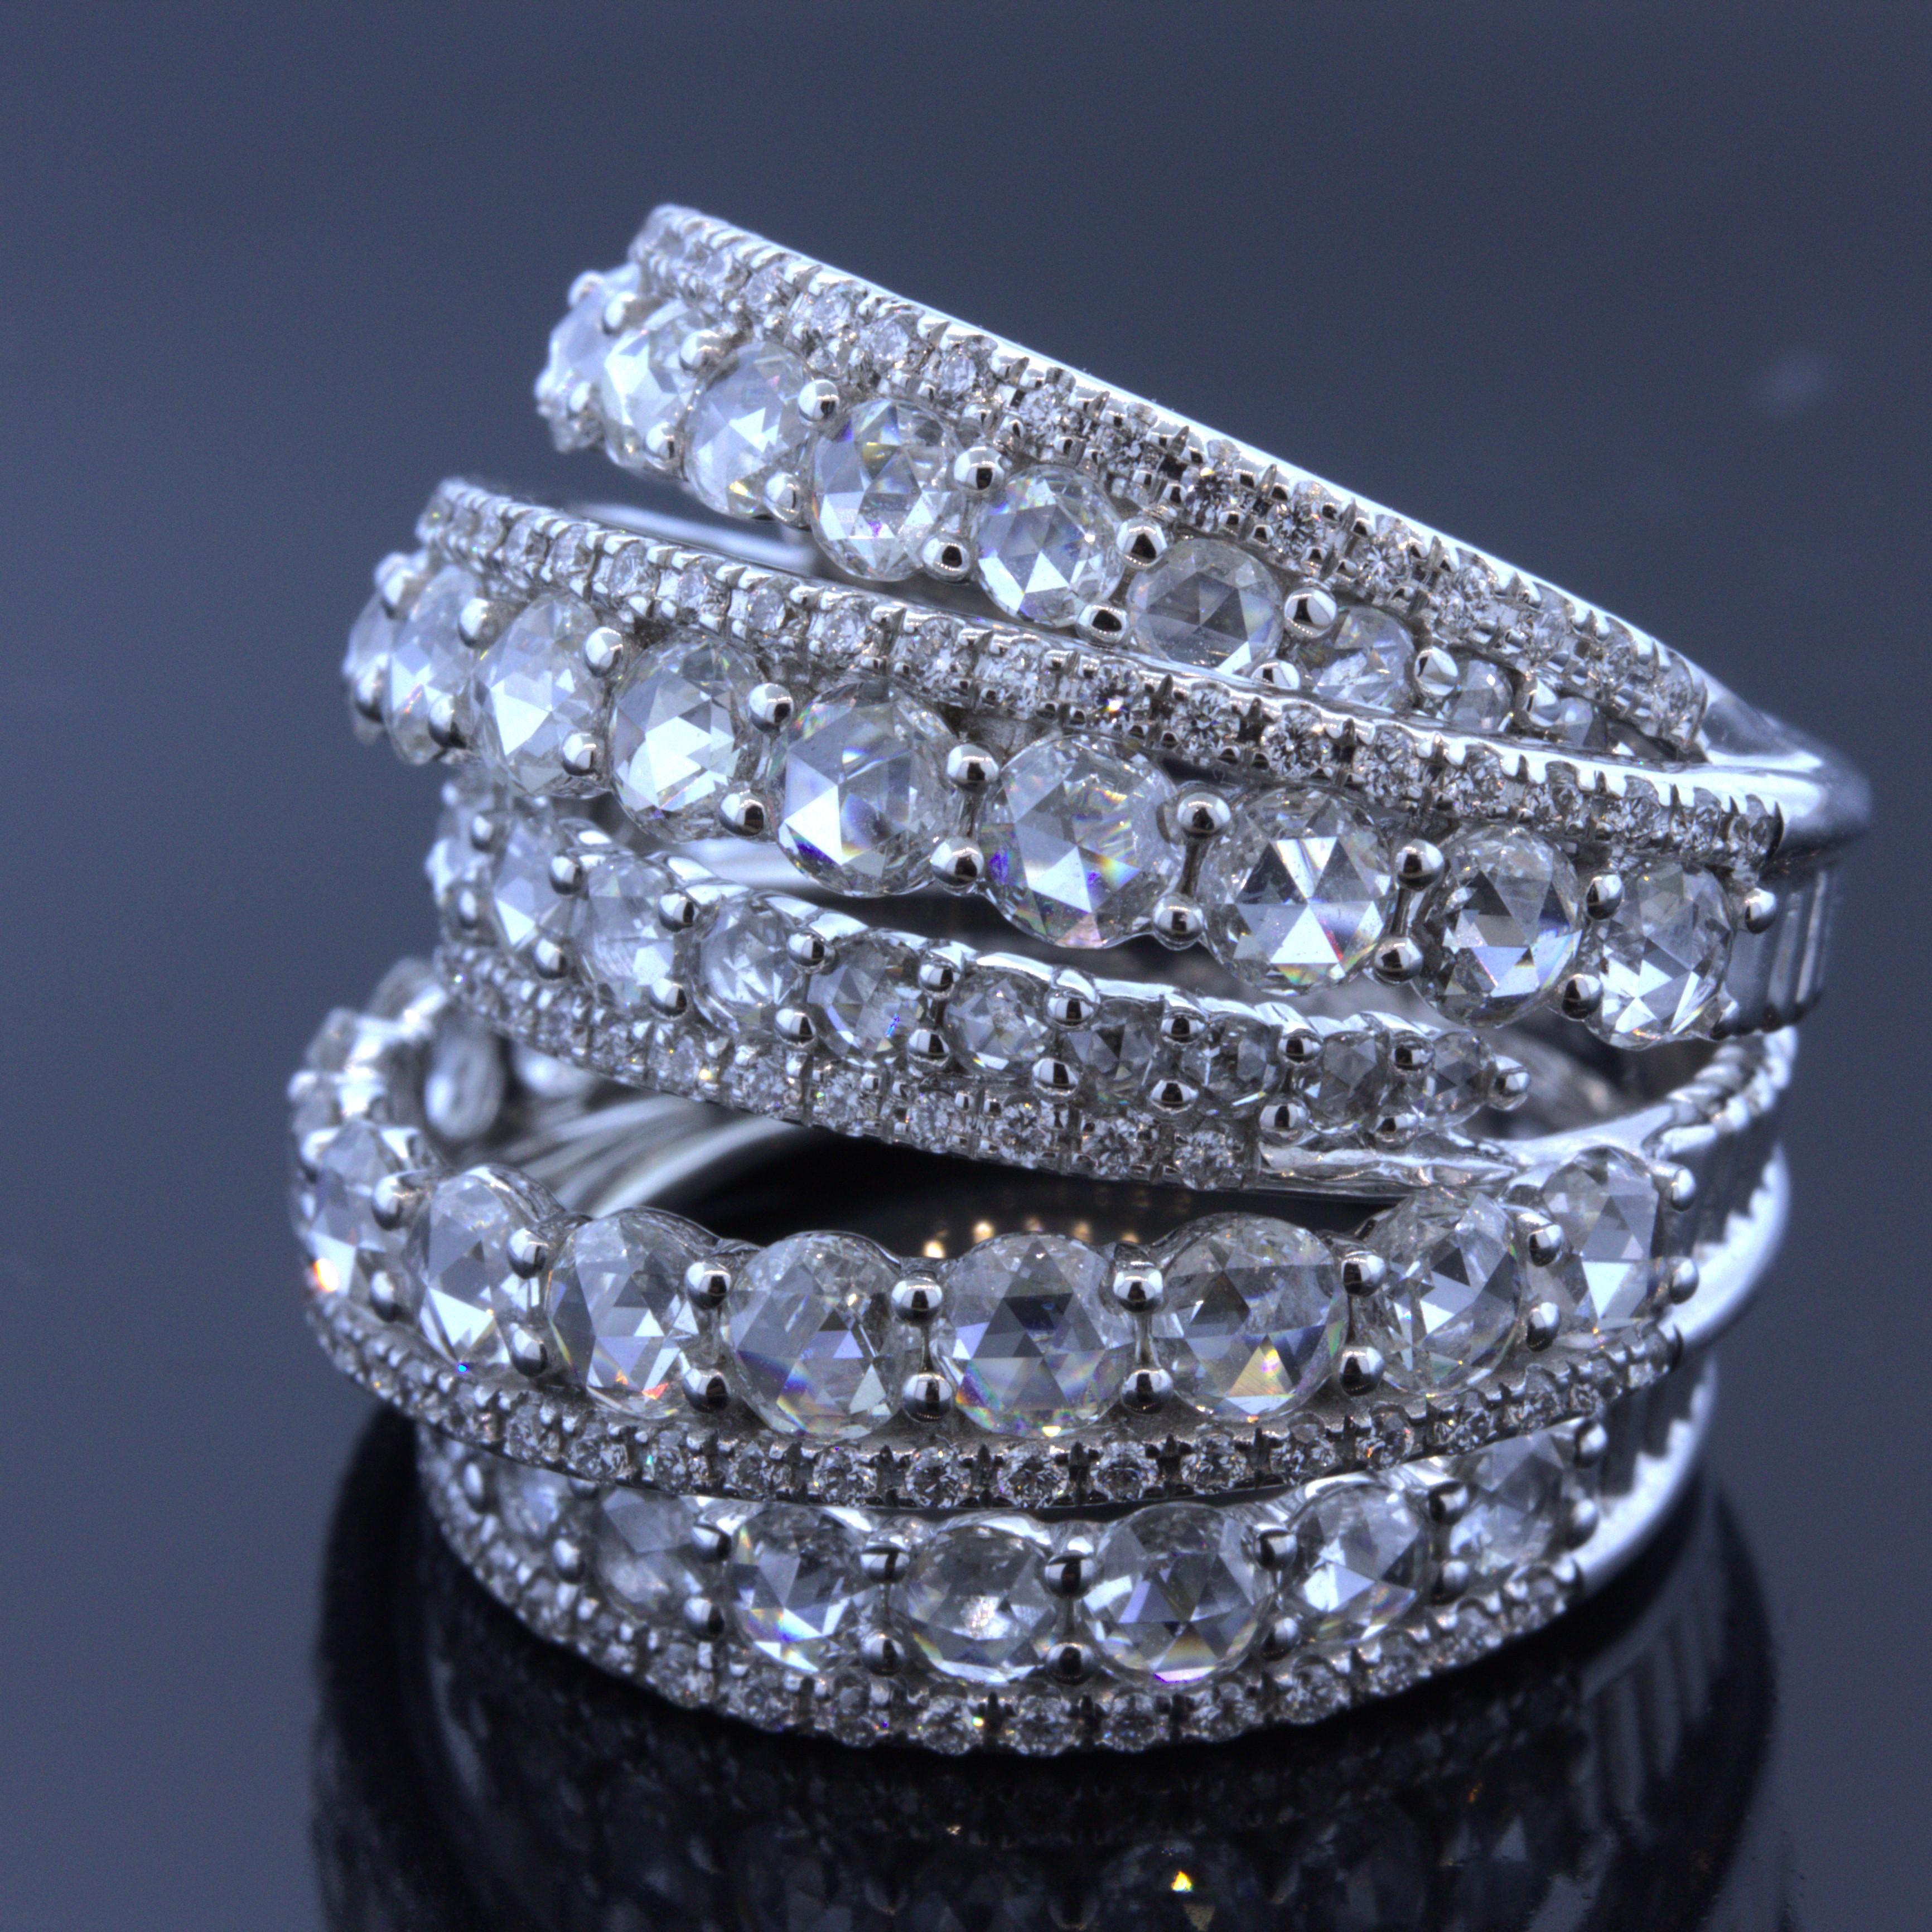 A chic, stylish, and unique diamond ring made in 18k white gold. It features 5.32 carats of fine bright white rose-cut and round brilliant-cut diamonds set over various layers of 18k white gold. It appears as if ribbons of diamonds are wrapped over